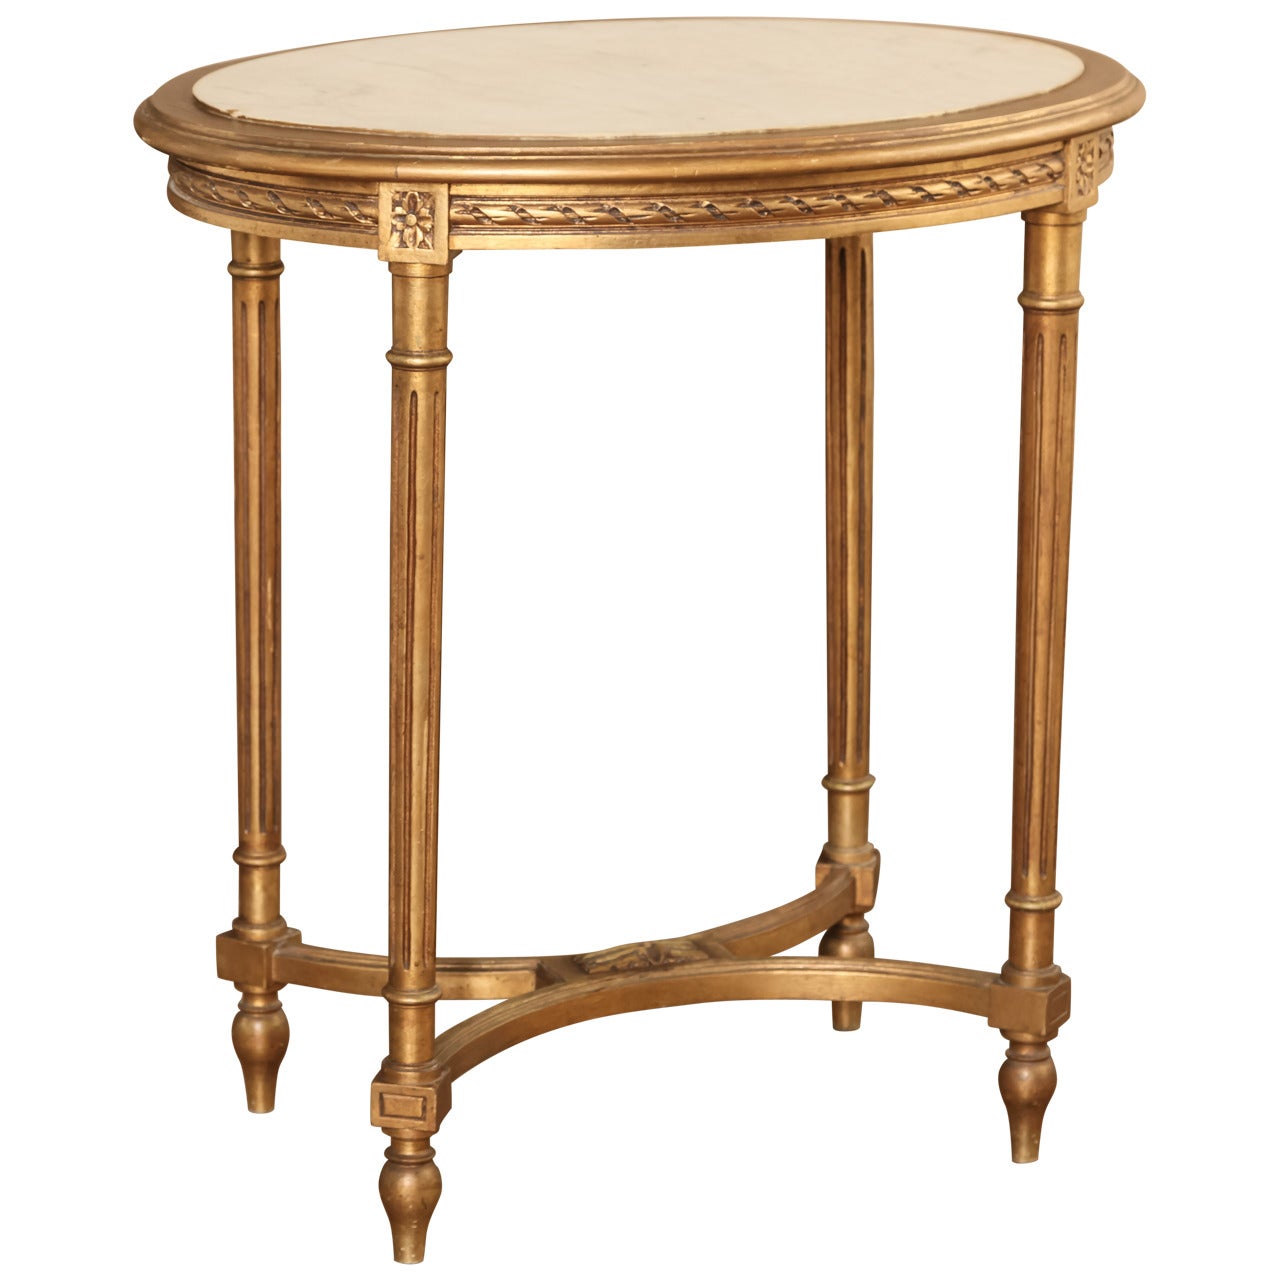 Antique Louis XVI Giltwood Marble-Top Table